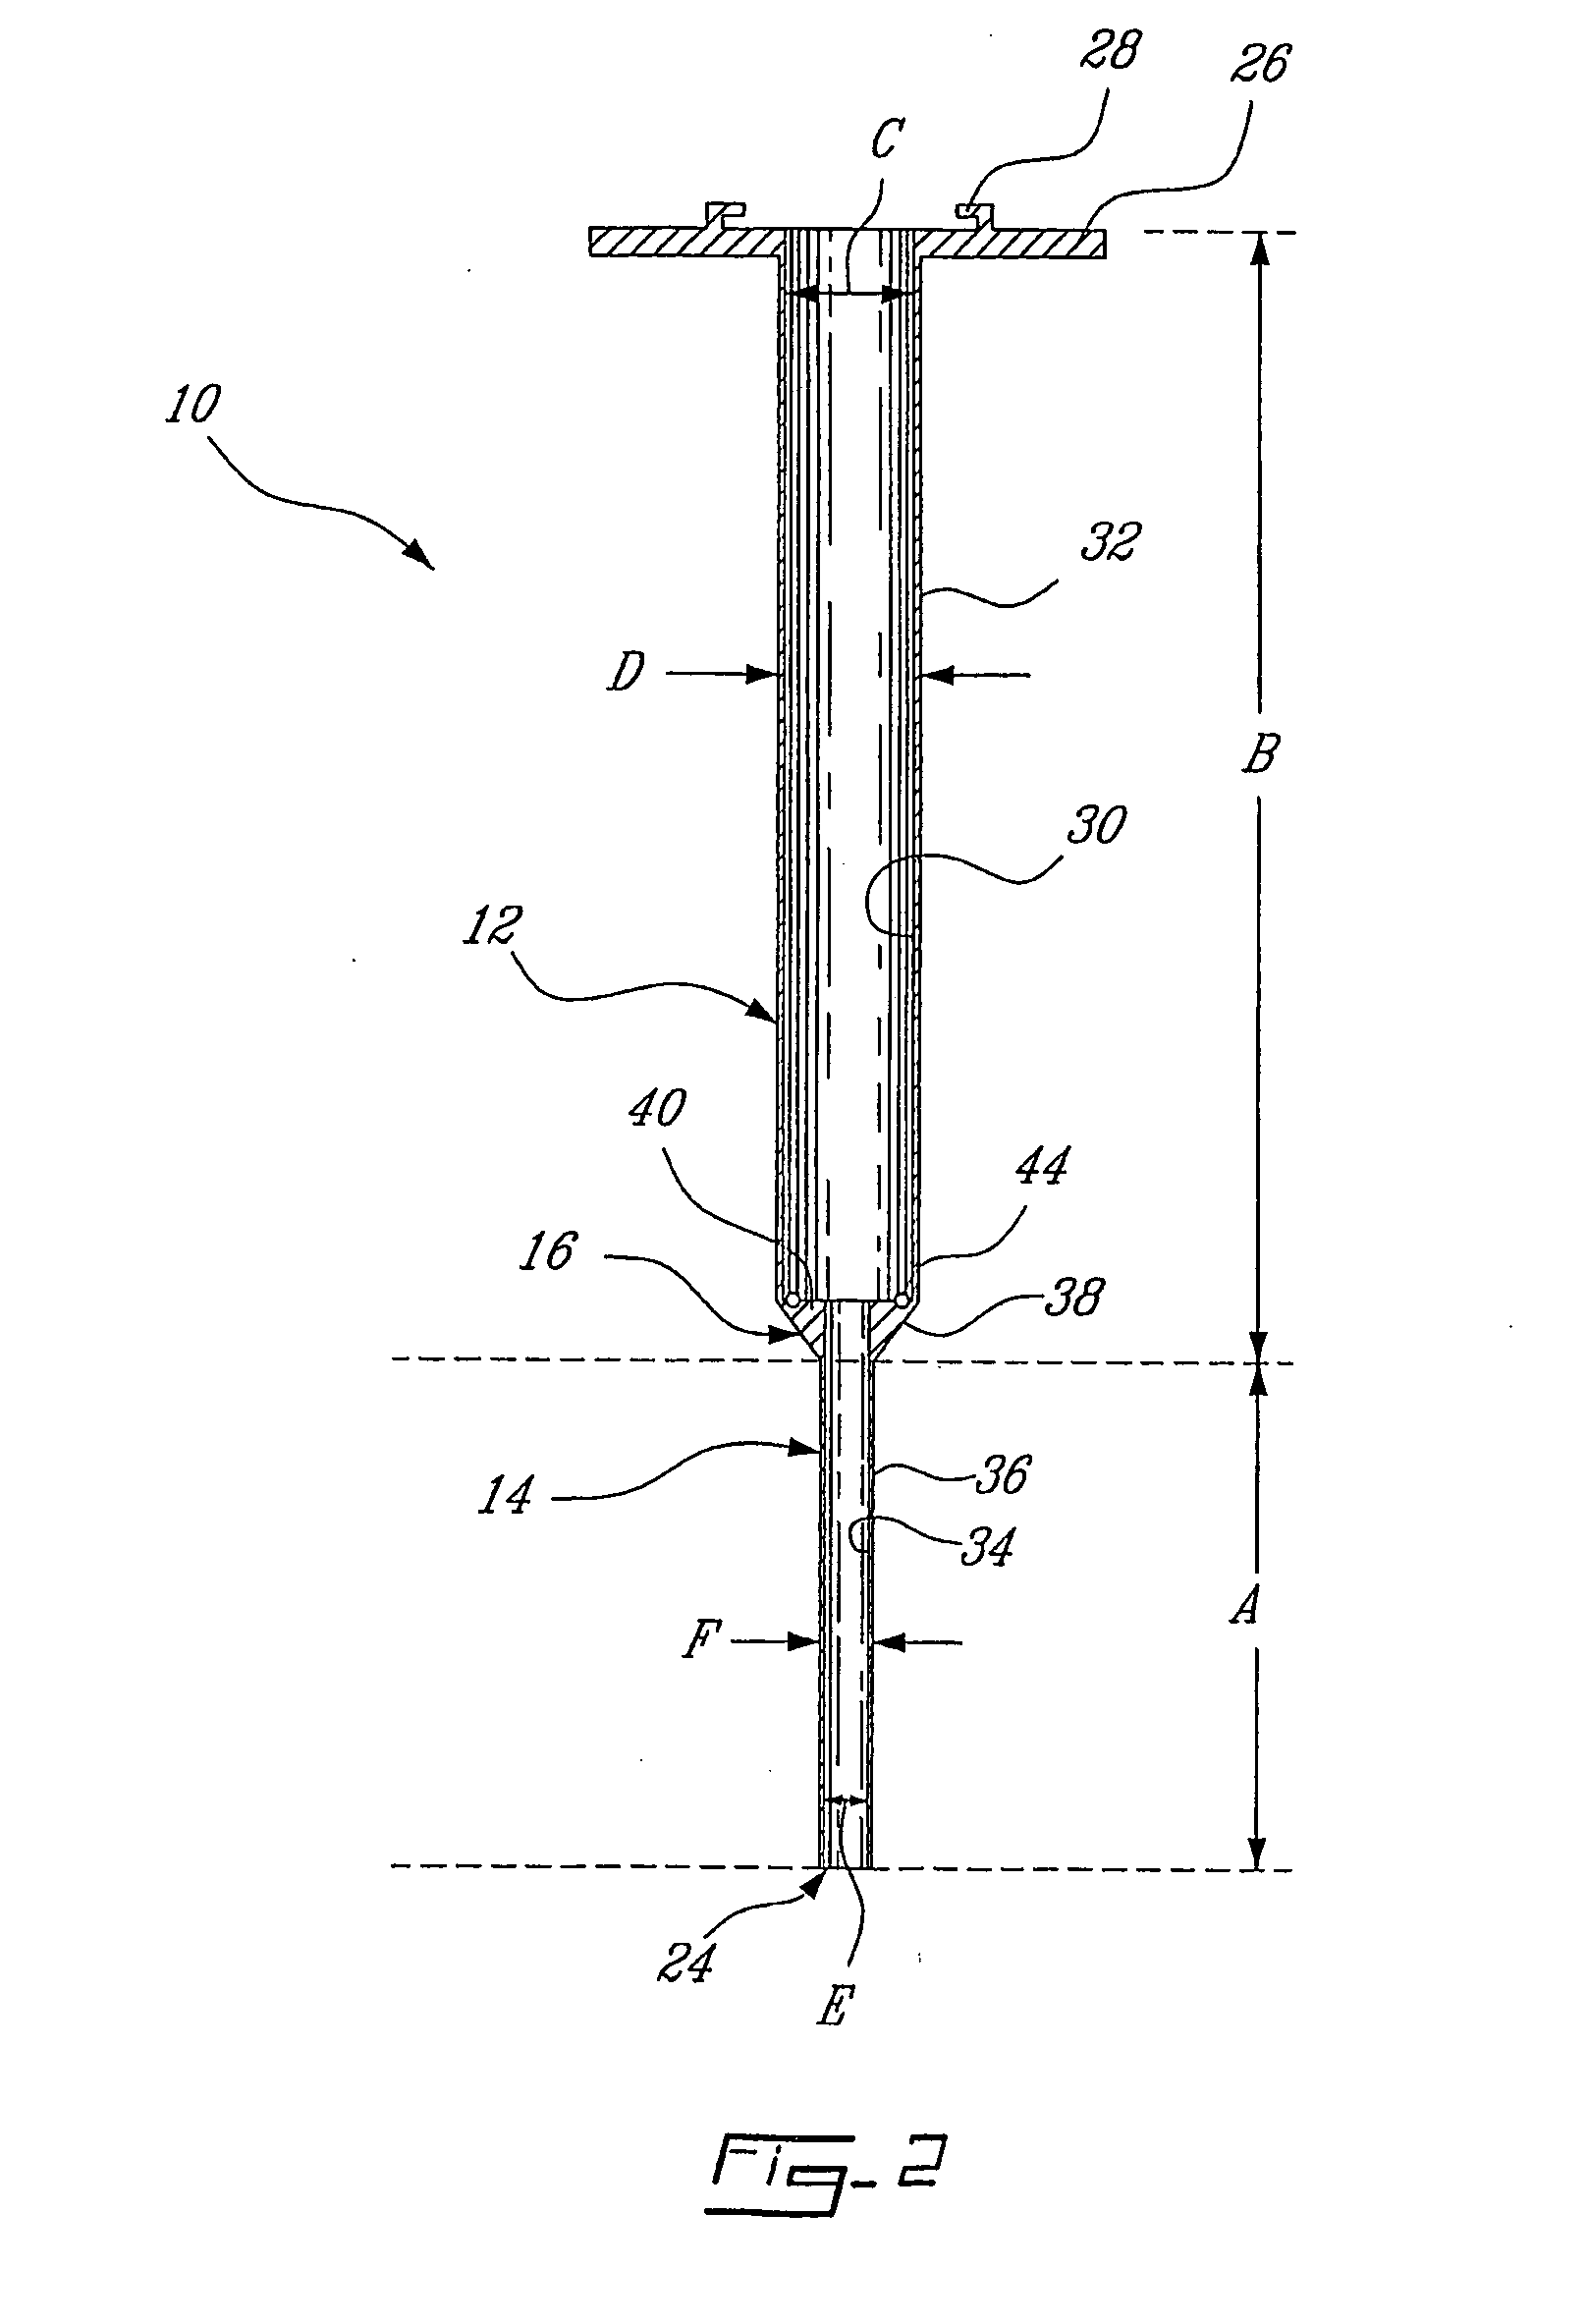 Device for injecting a viscous material into a hard tissue